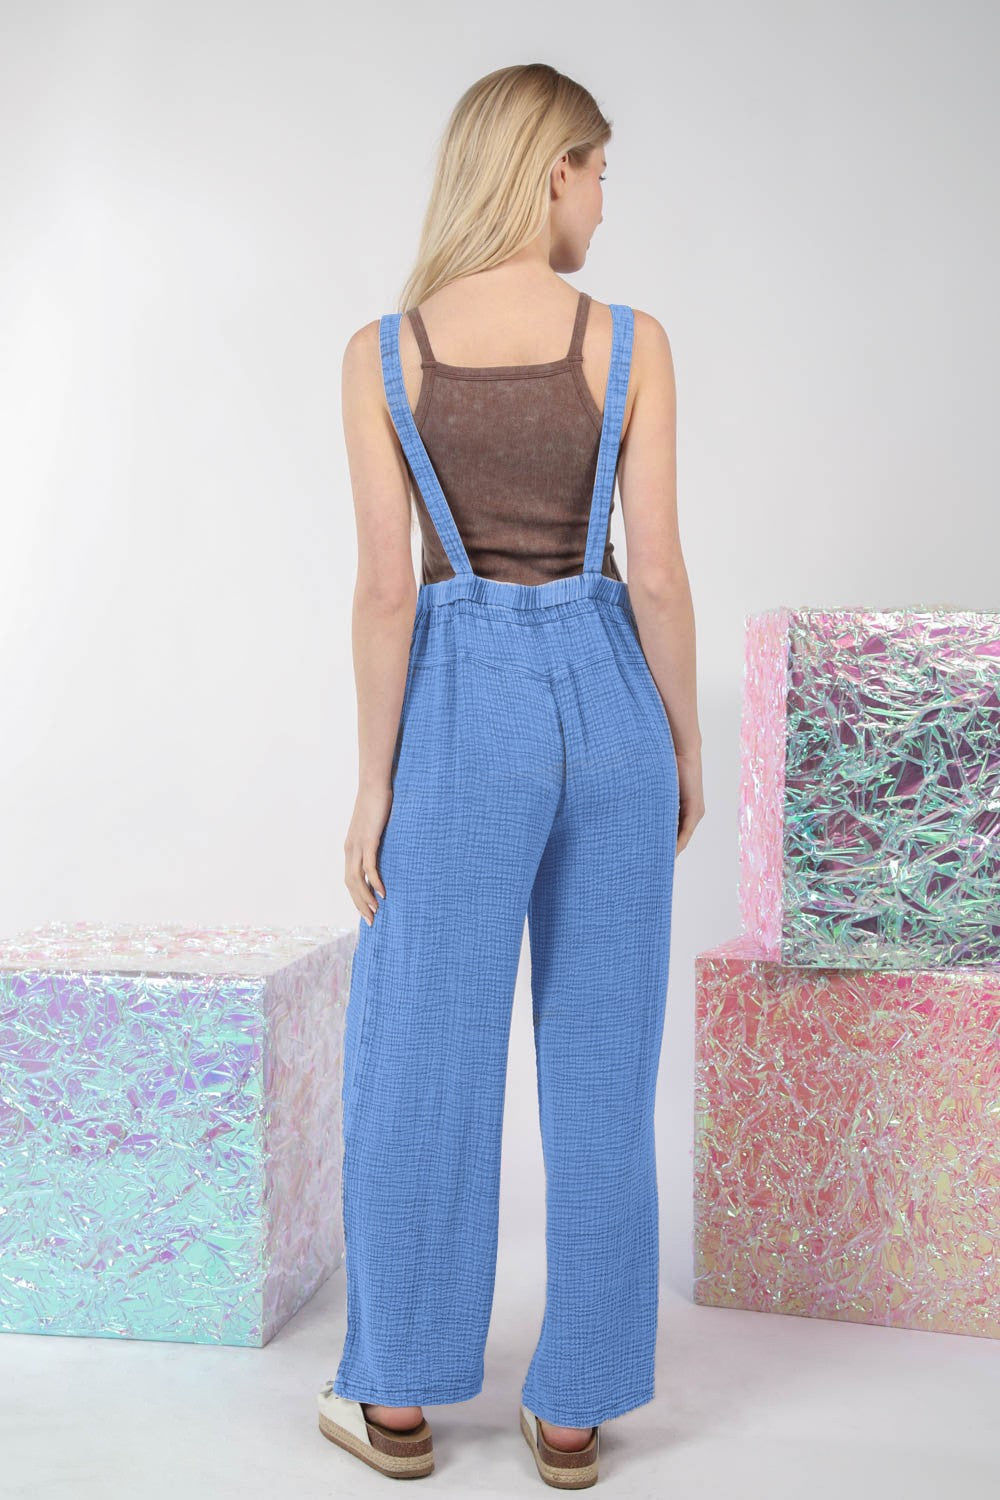 Mineral Wash Overalls in Blue